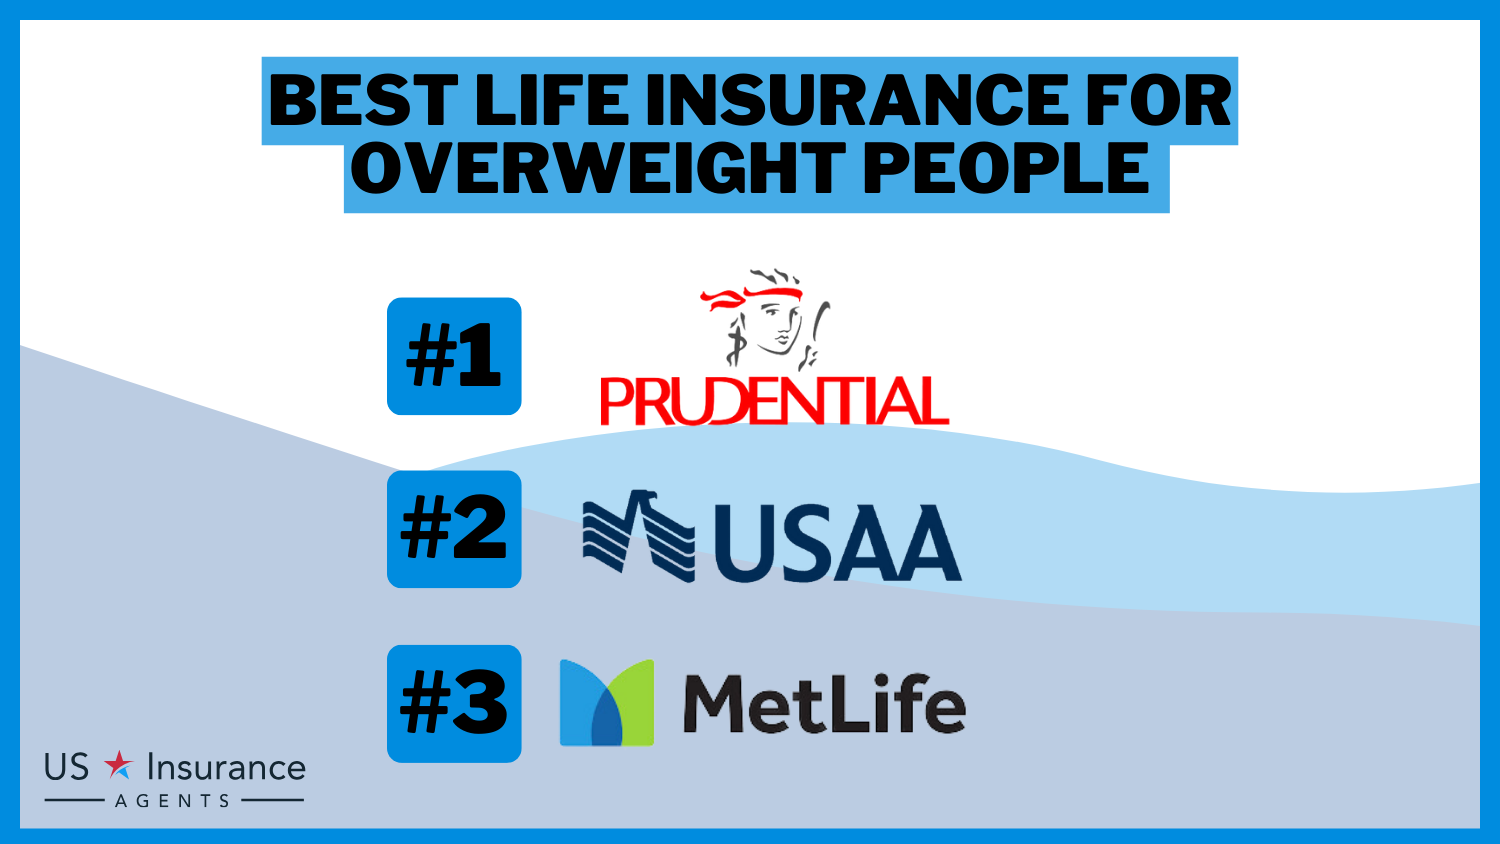 3 Best Life Insurance for Overweight People: Prudential, USAA, and Metlife.